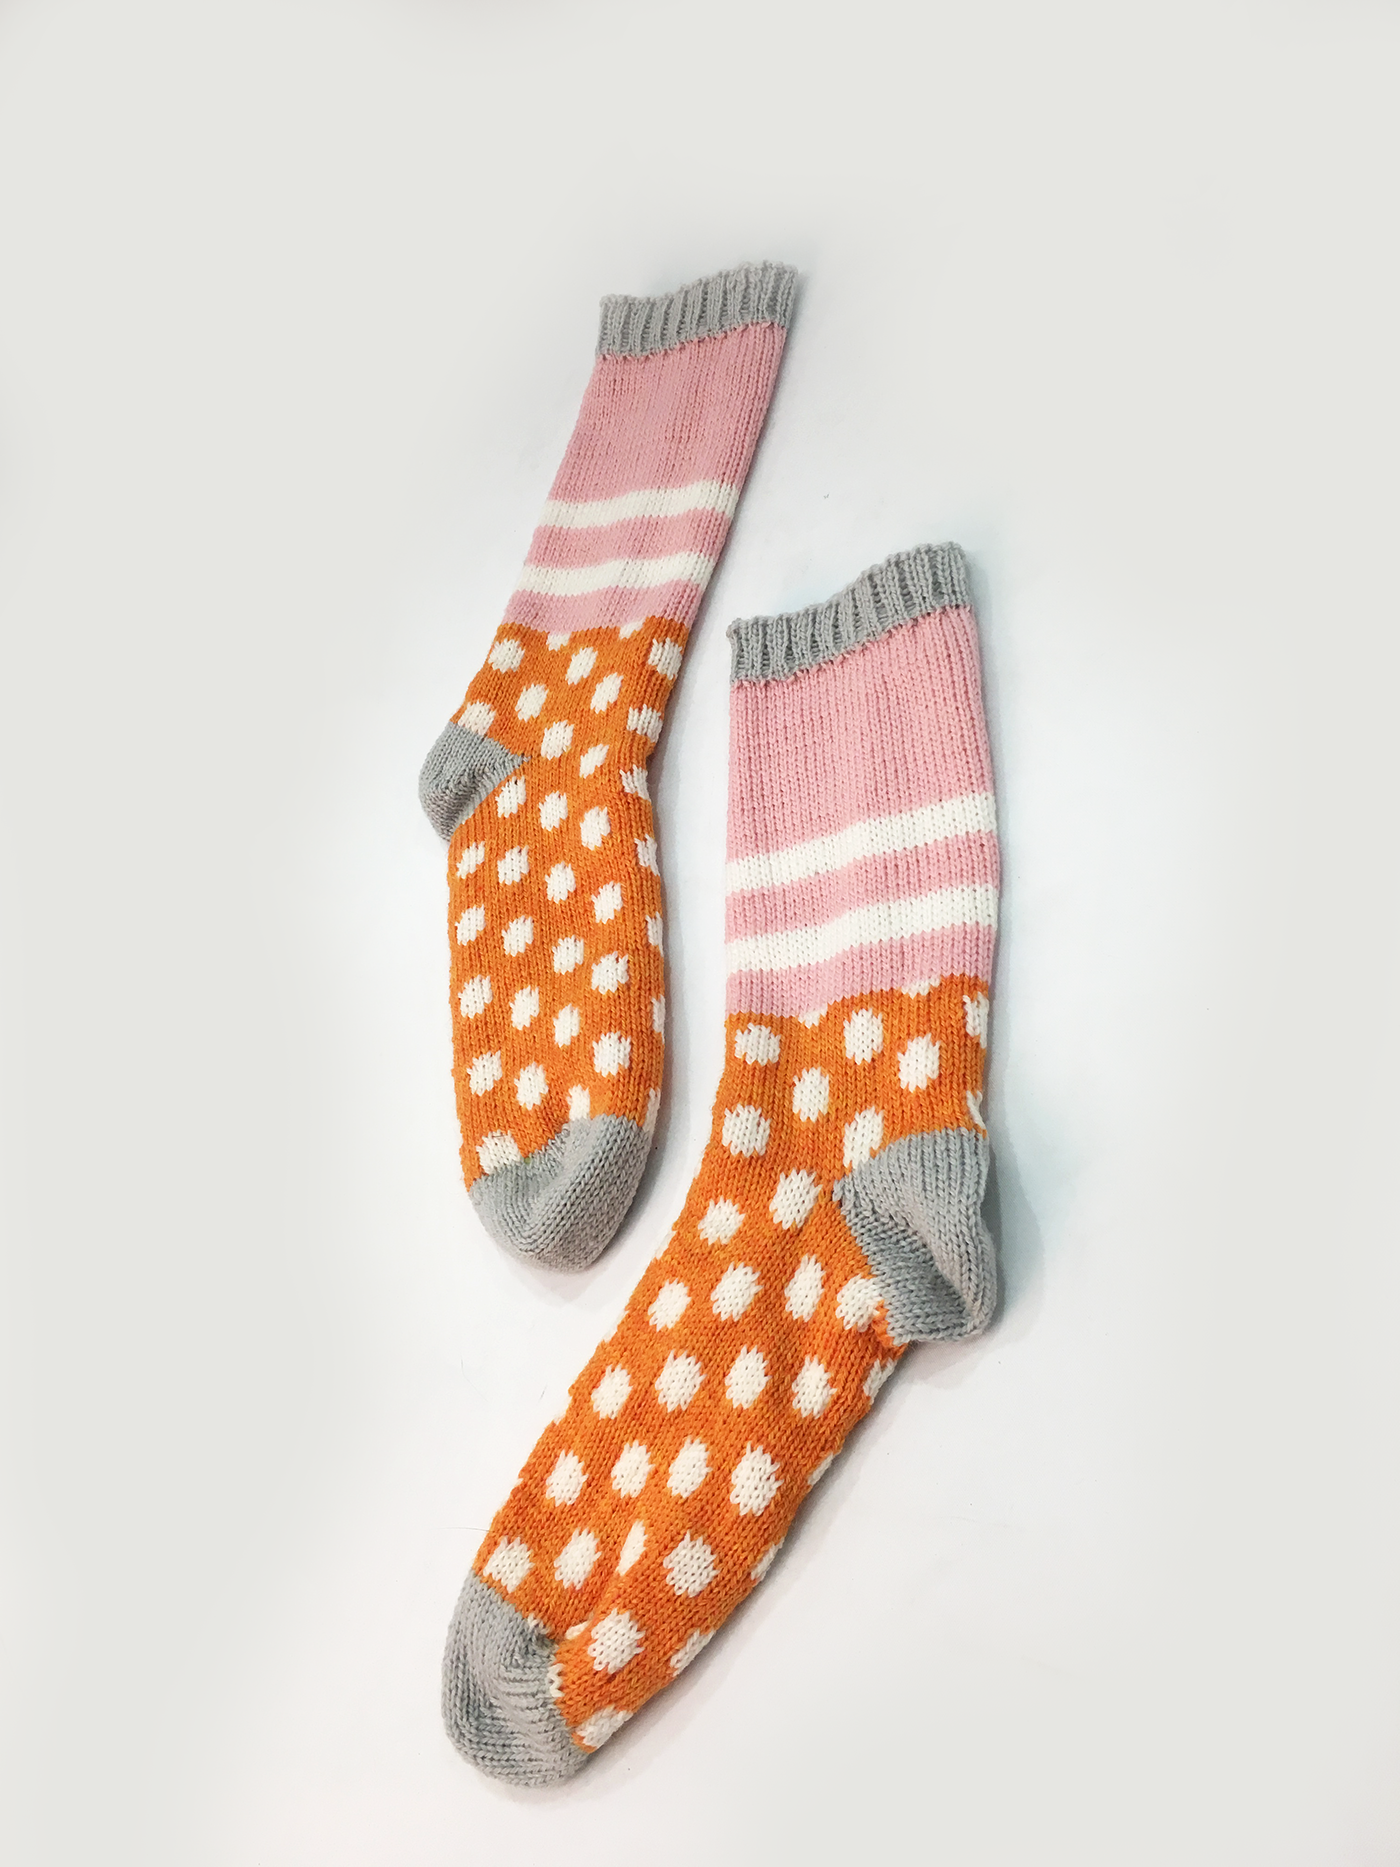 socks accessory design soft accessories Playful whimsical experimental bold colorful unconventional garment design